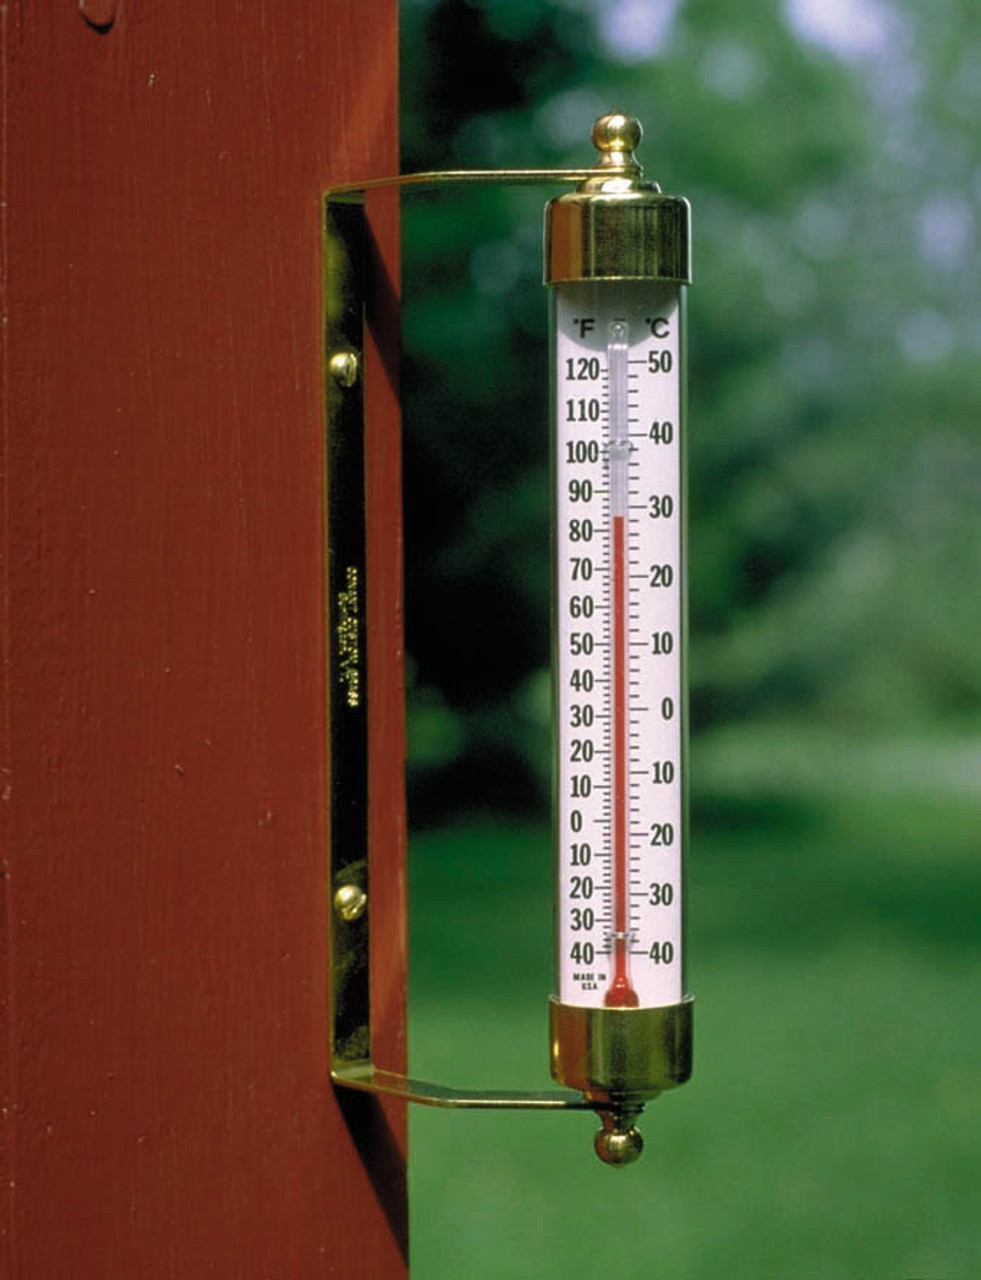 Original Vermont Outdoor Thermometer - Brass - The New Hampshire Magazine  Store